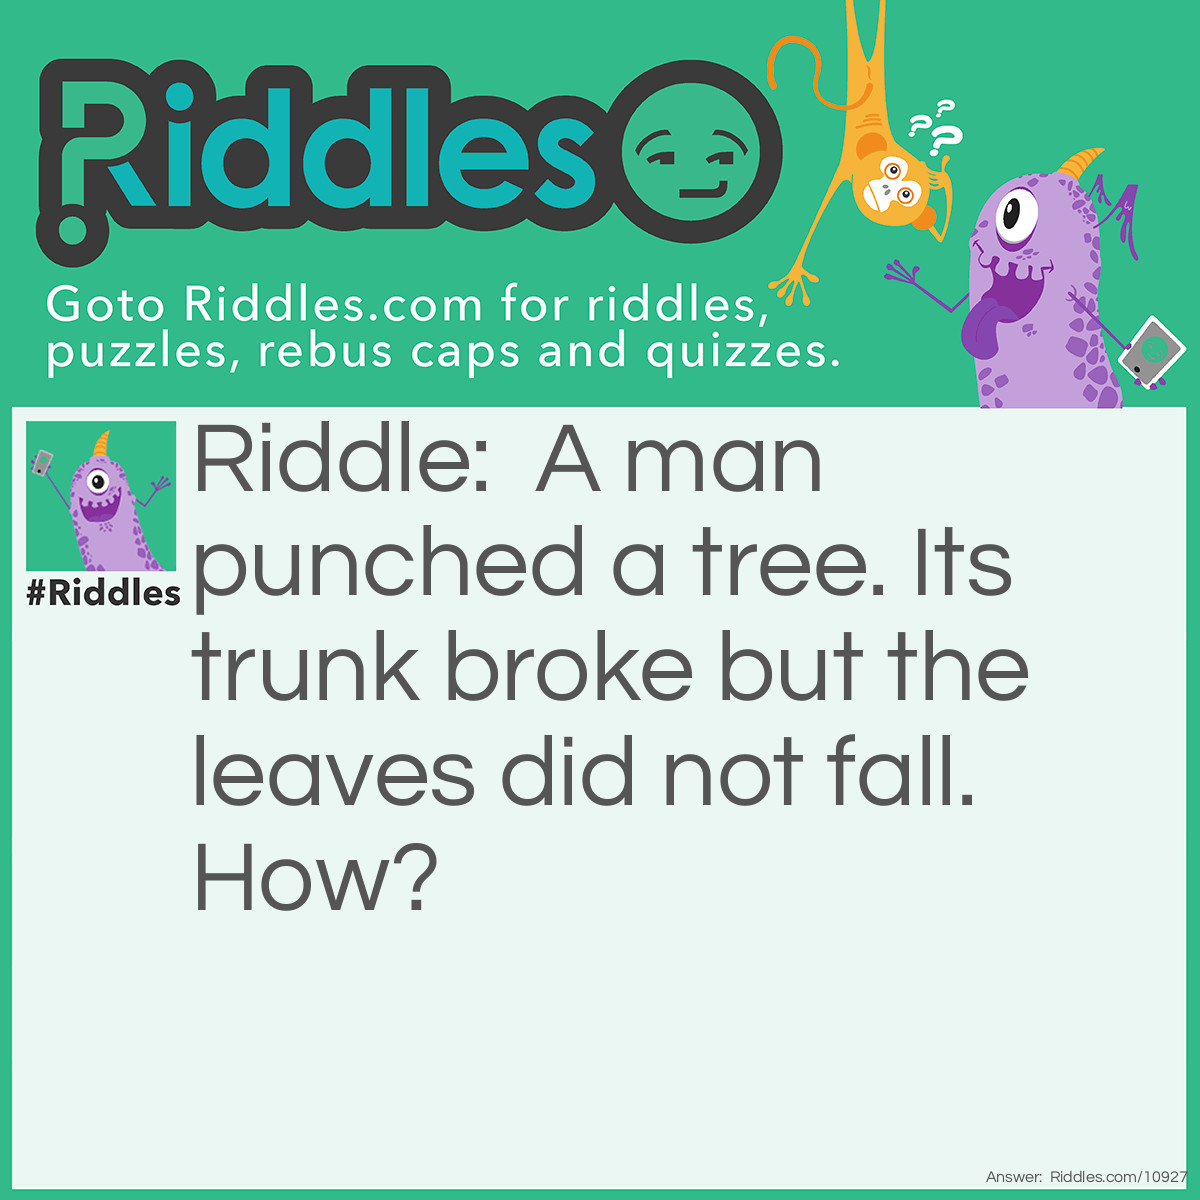 Riddle: A man punched a tree. Its trunk broke but the leaves did not fall. How? Answer: The man was Steve, and it was Minecraft.